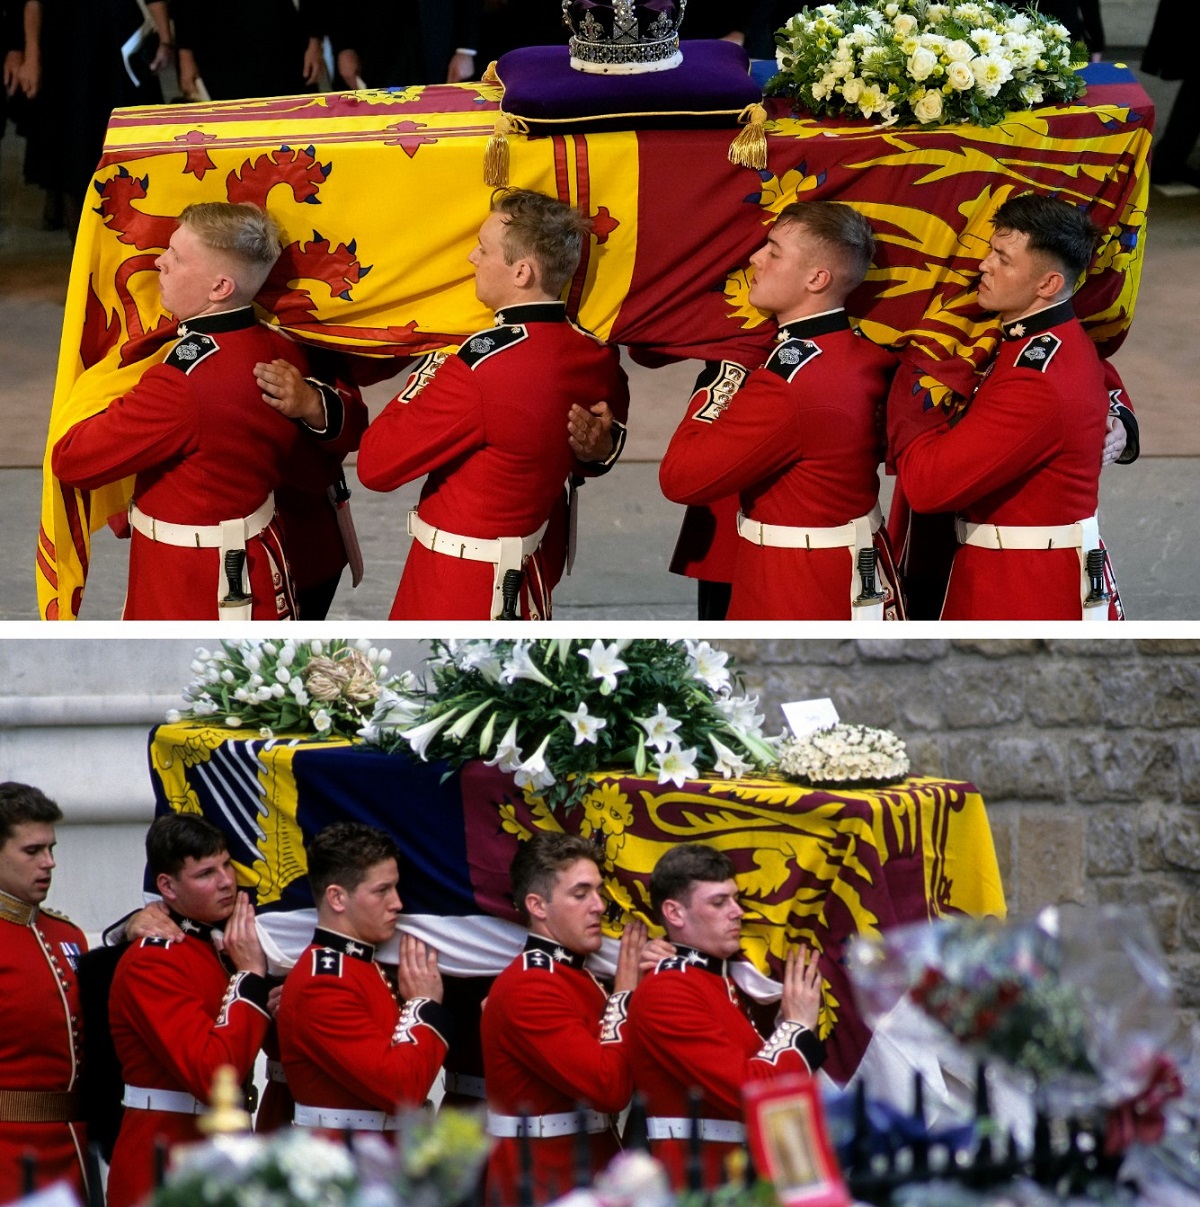 (Top) Queen Elizabeth's coffin being carried into Westminster, (Bottom) Princess Diana's coffin being from Westminster Abbey